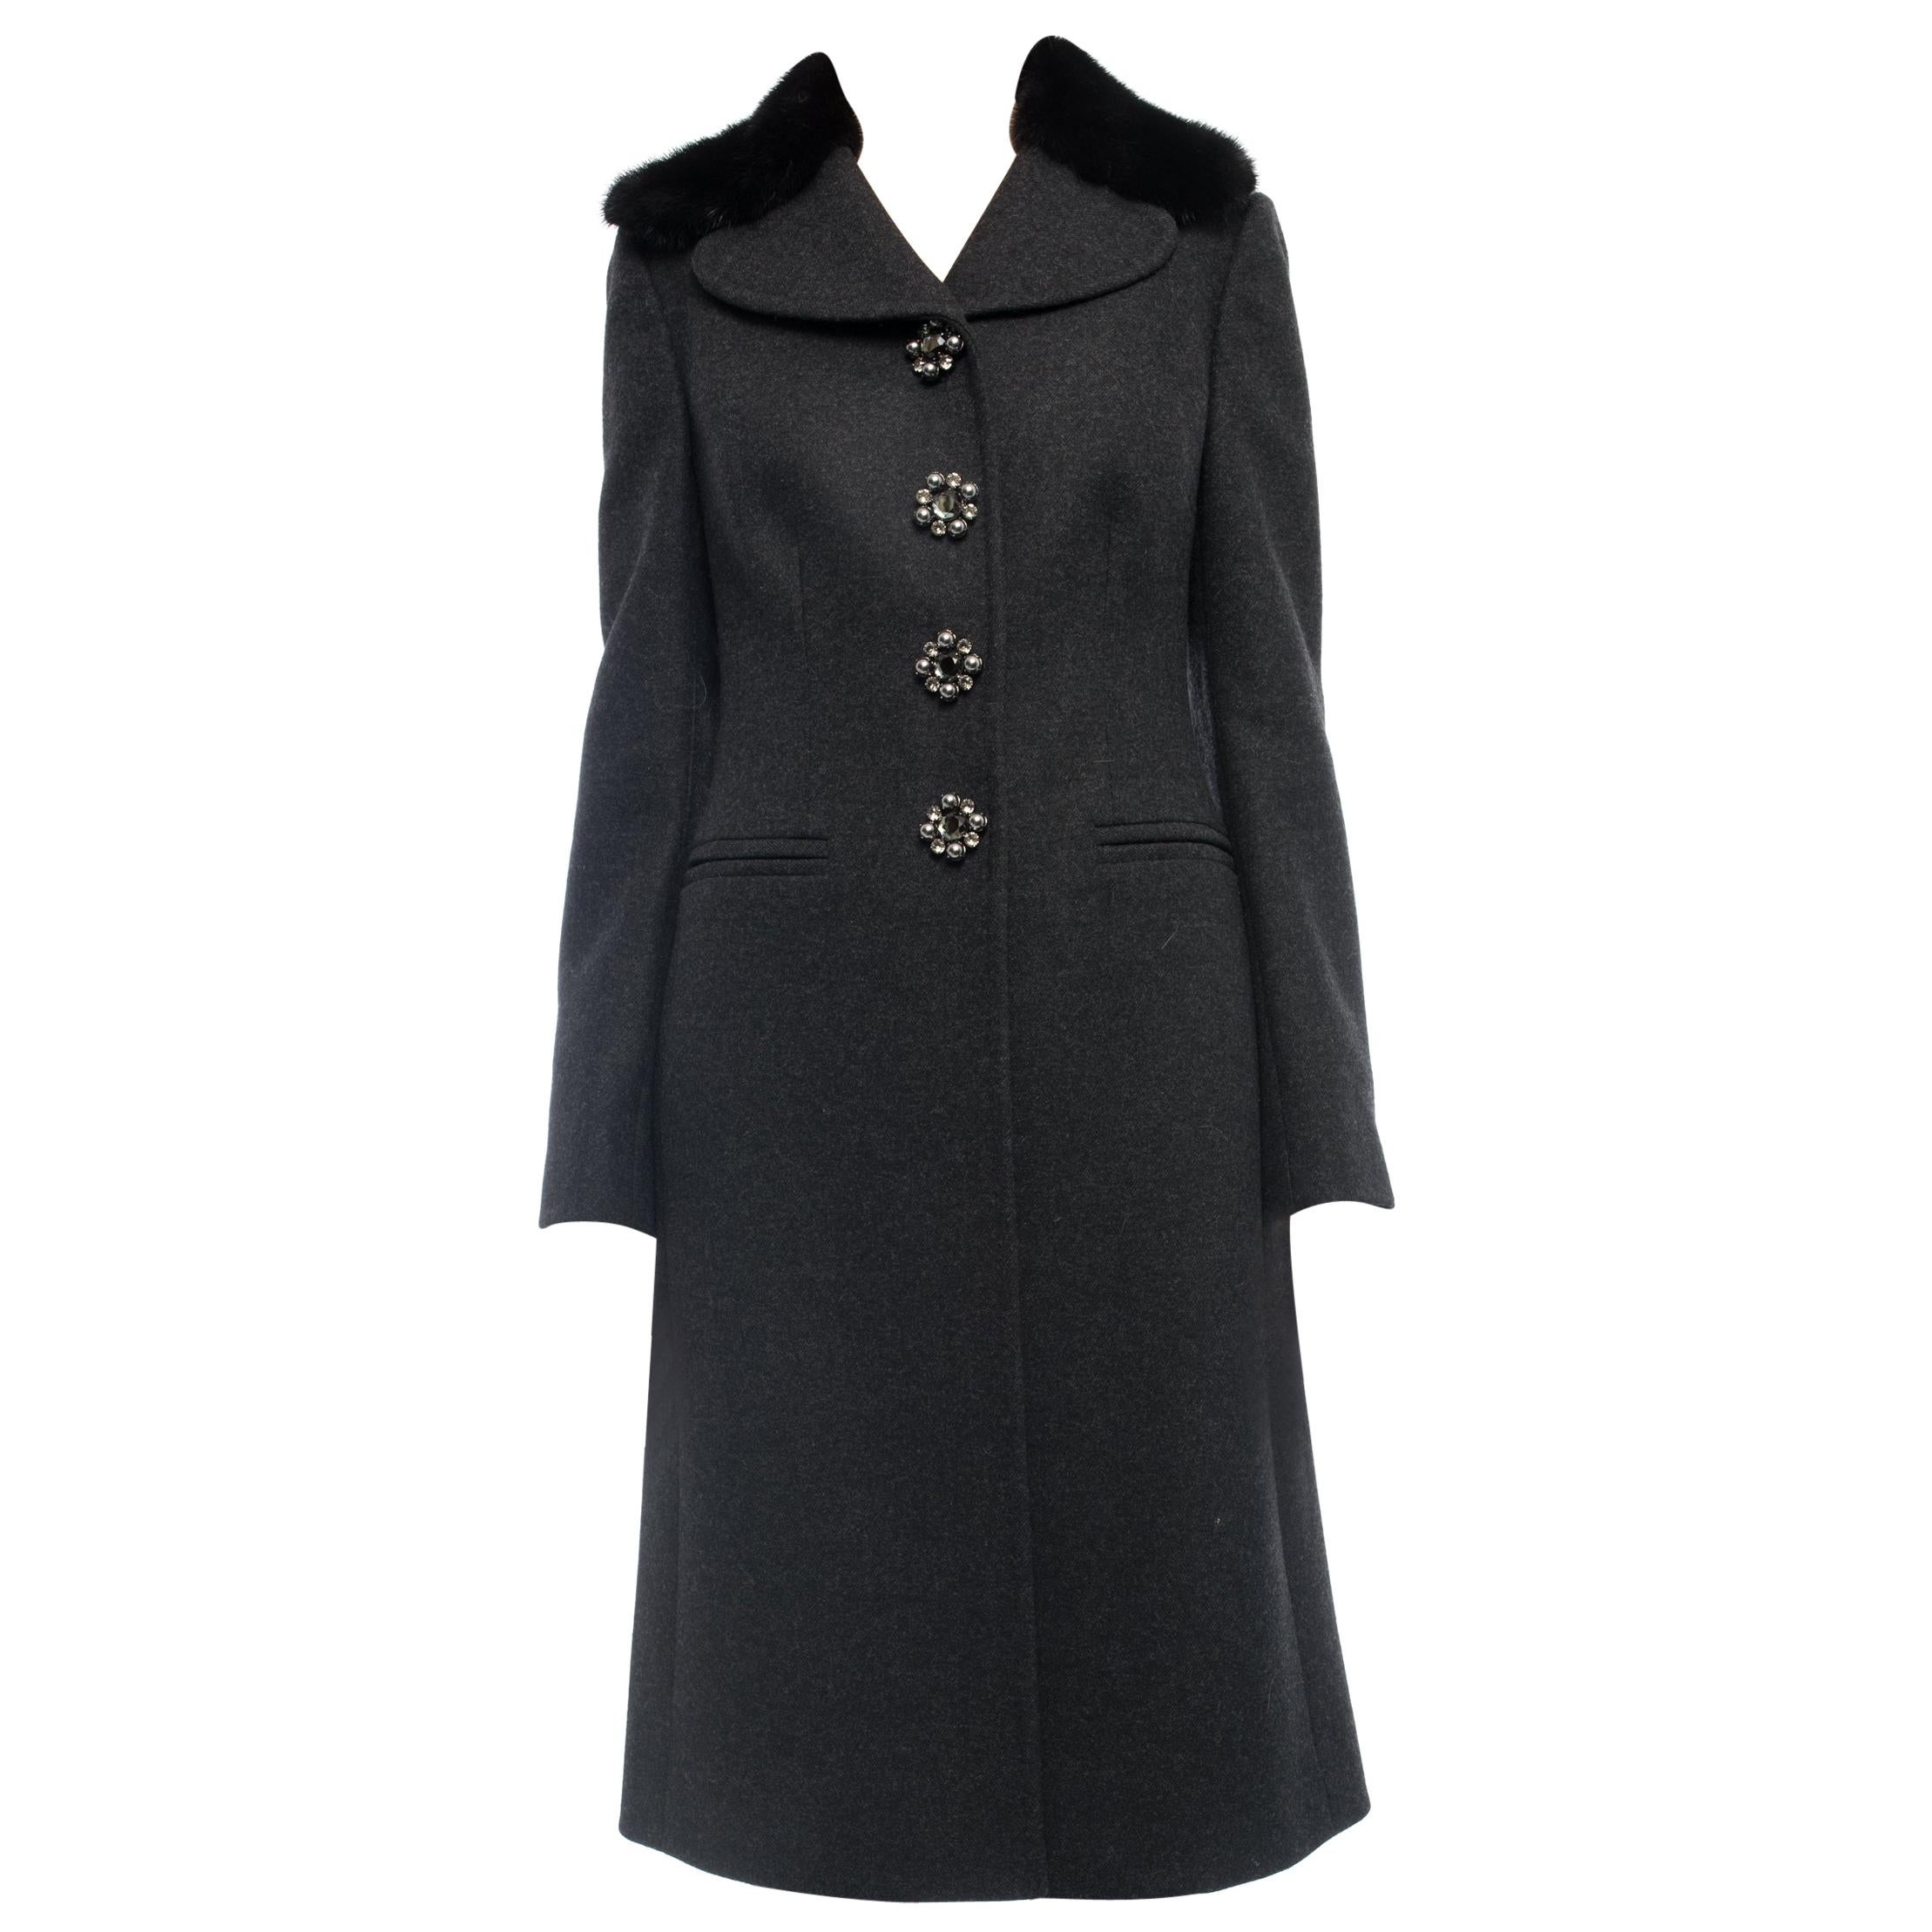 Dolce & Gabbana Charcoal Grey Mink Collar Wool Coat with Jewel Buttons - S